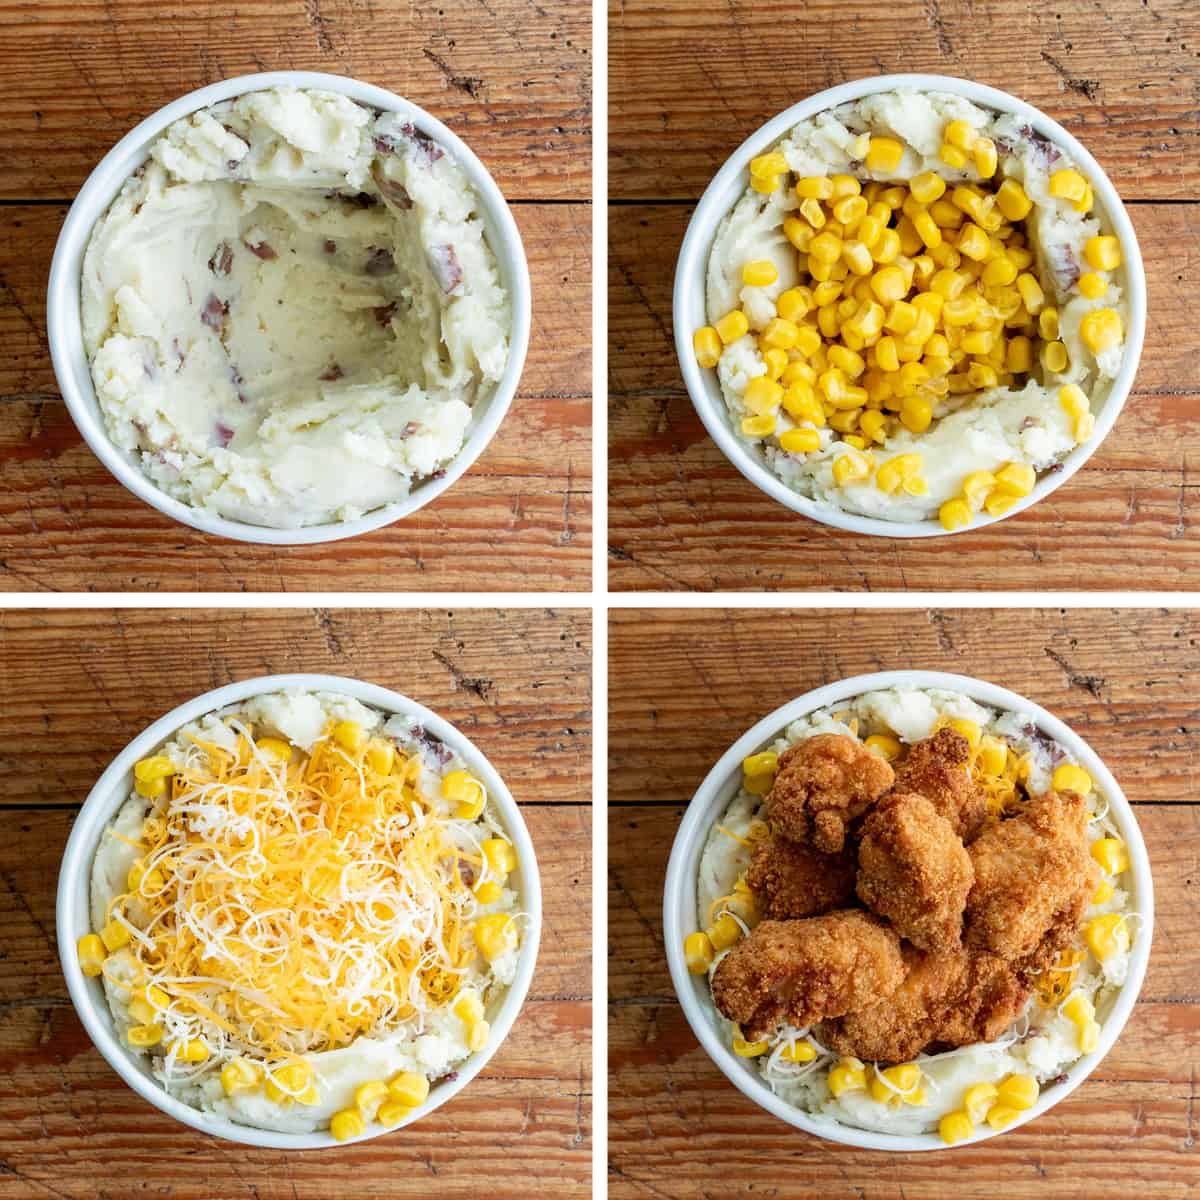 Steps for adding mashed potatoes, corn, cheese, and chicken to a bowl to make Mashed Potato Bowls.